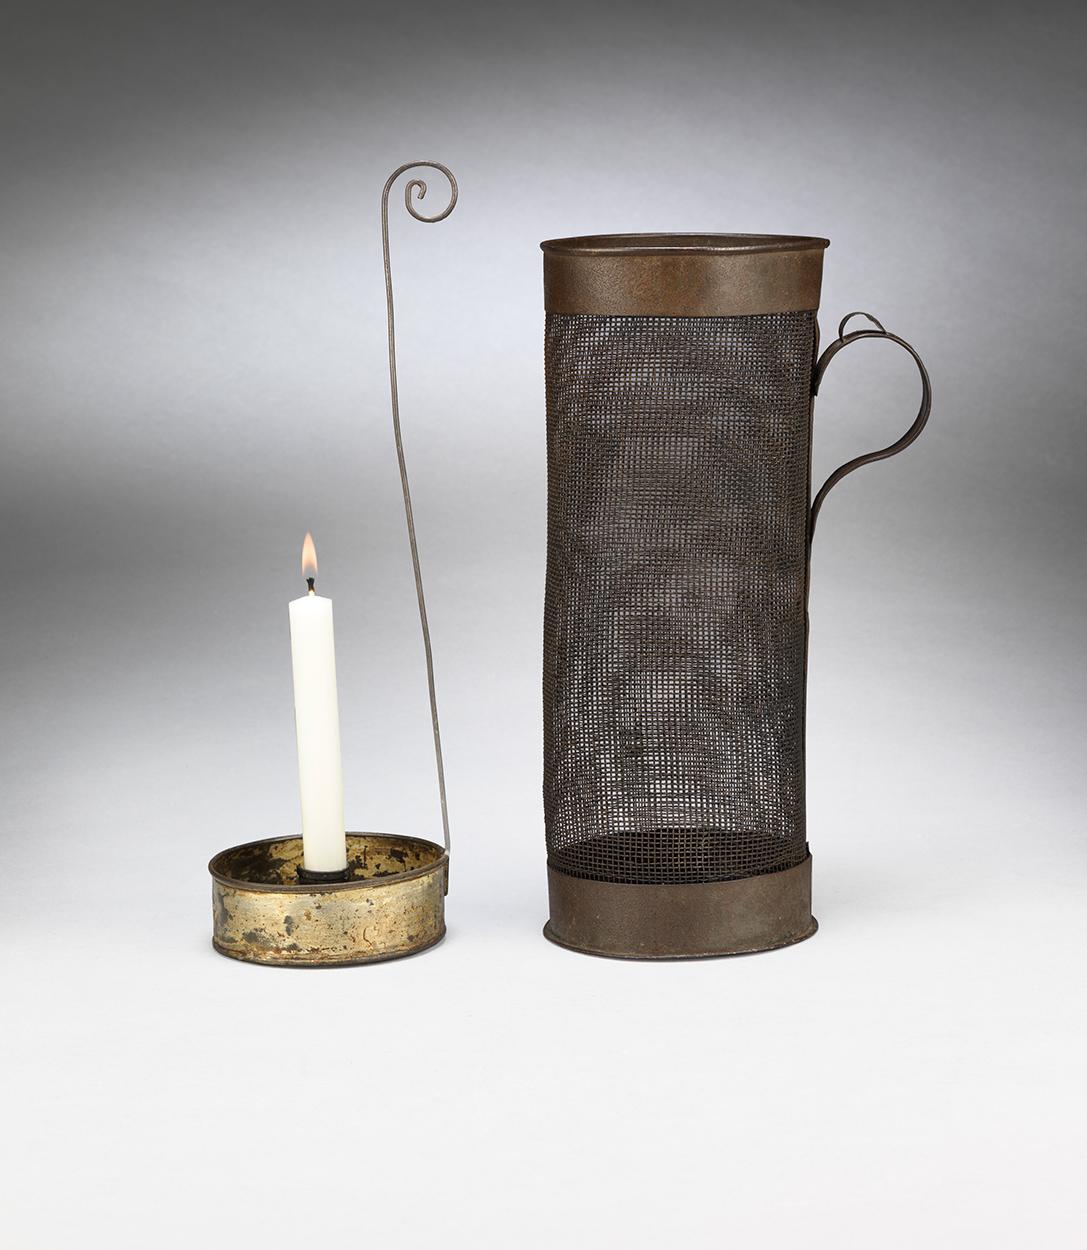 An Unusual Cylindrical Candle Lantern or Stable Light